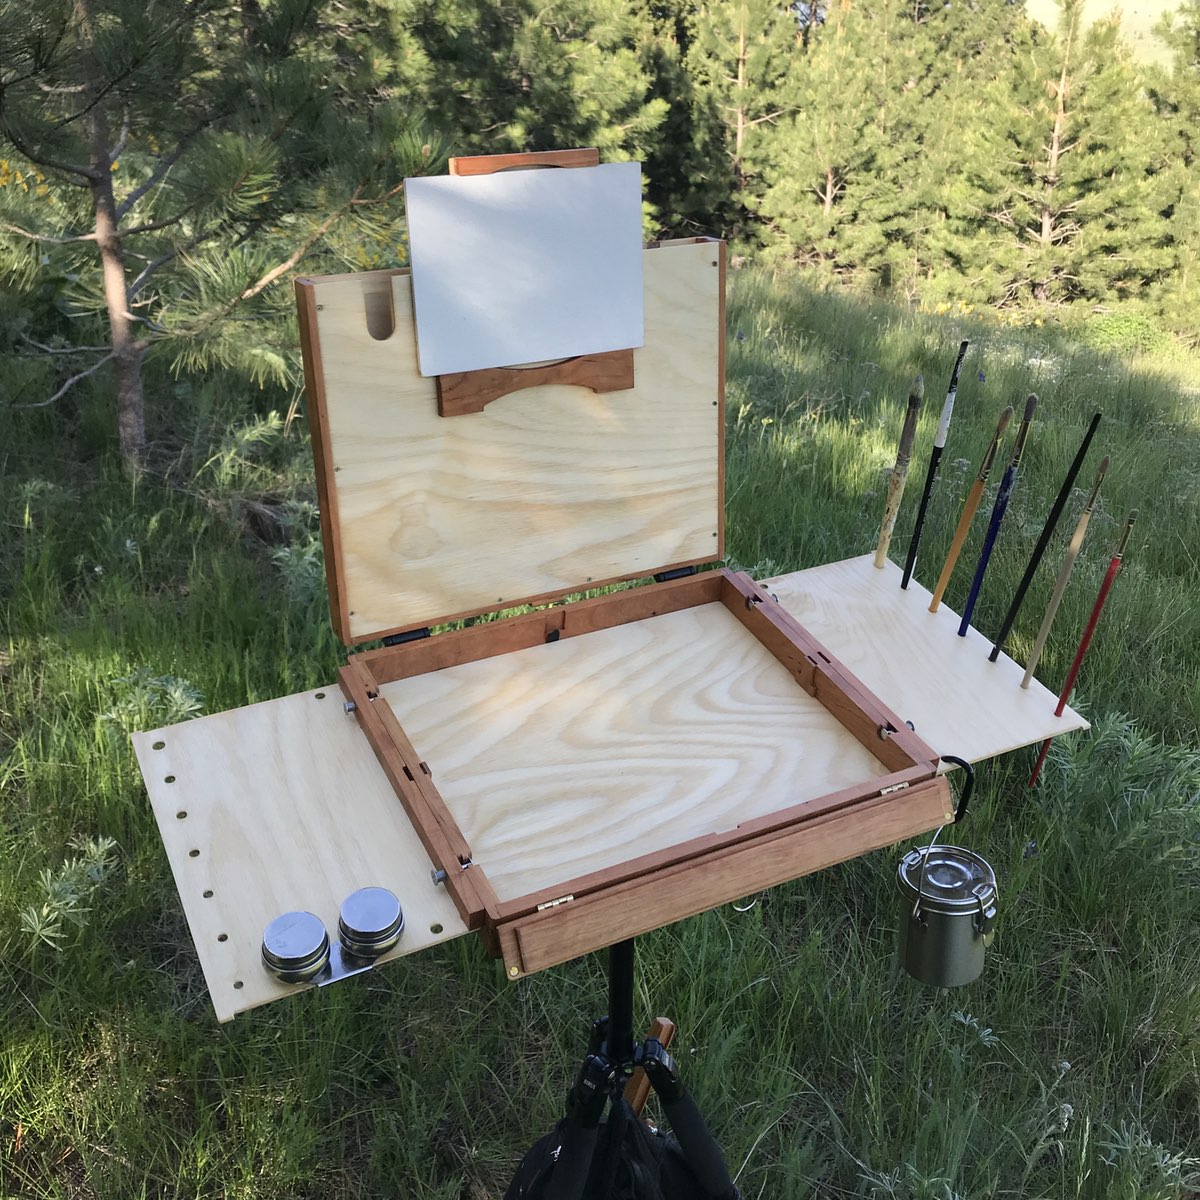 Two Pochade Box Stories You Just Have to Read - OutdoorPainter